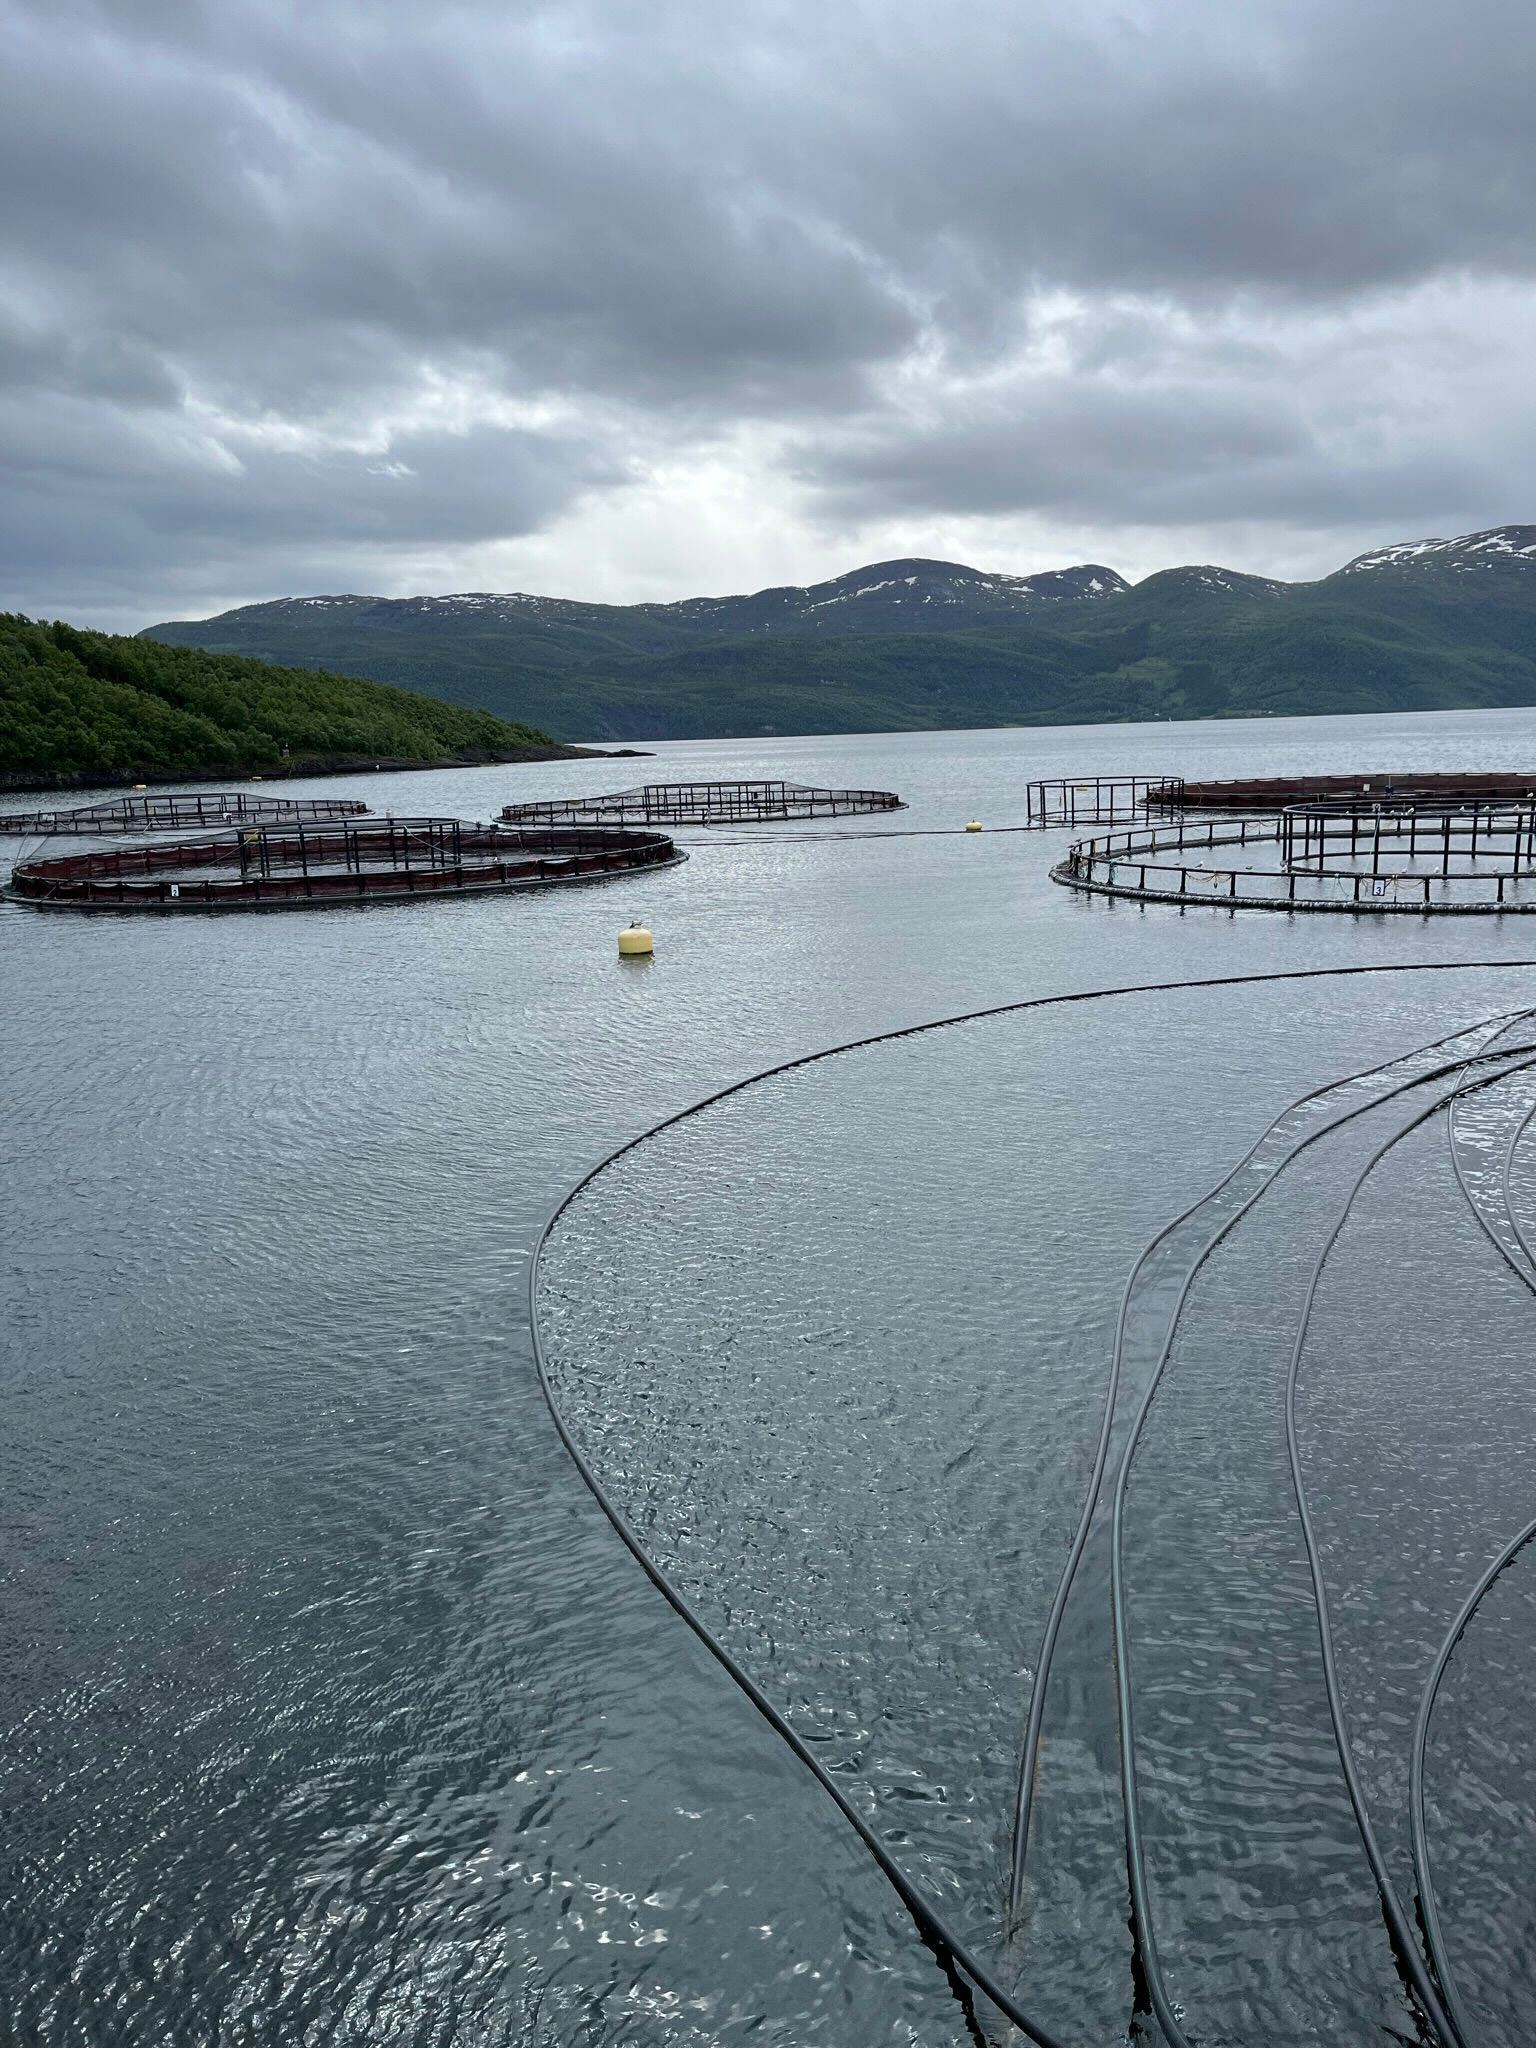 The net pens are moved around the fjord between harvests to allow ‘fallow’ areas to recover